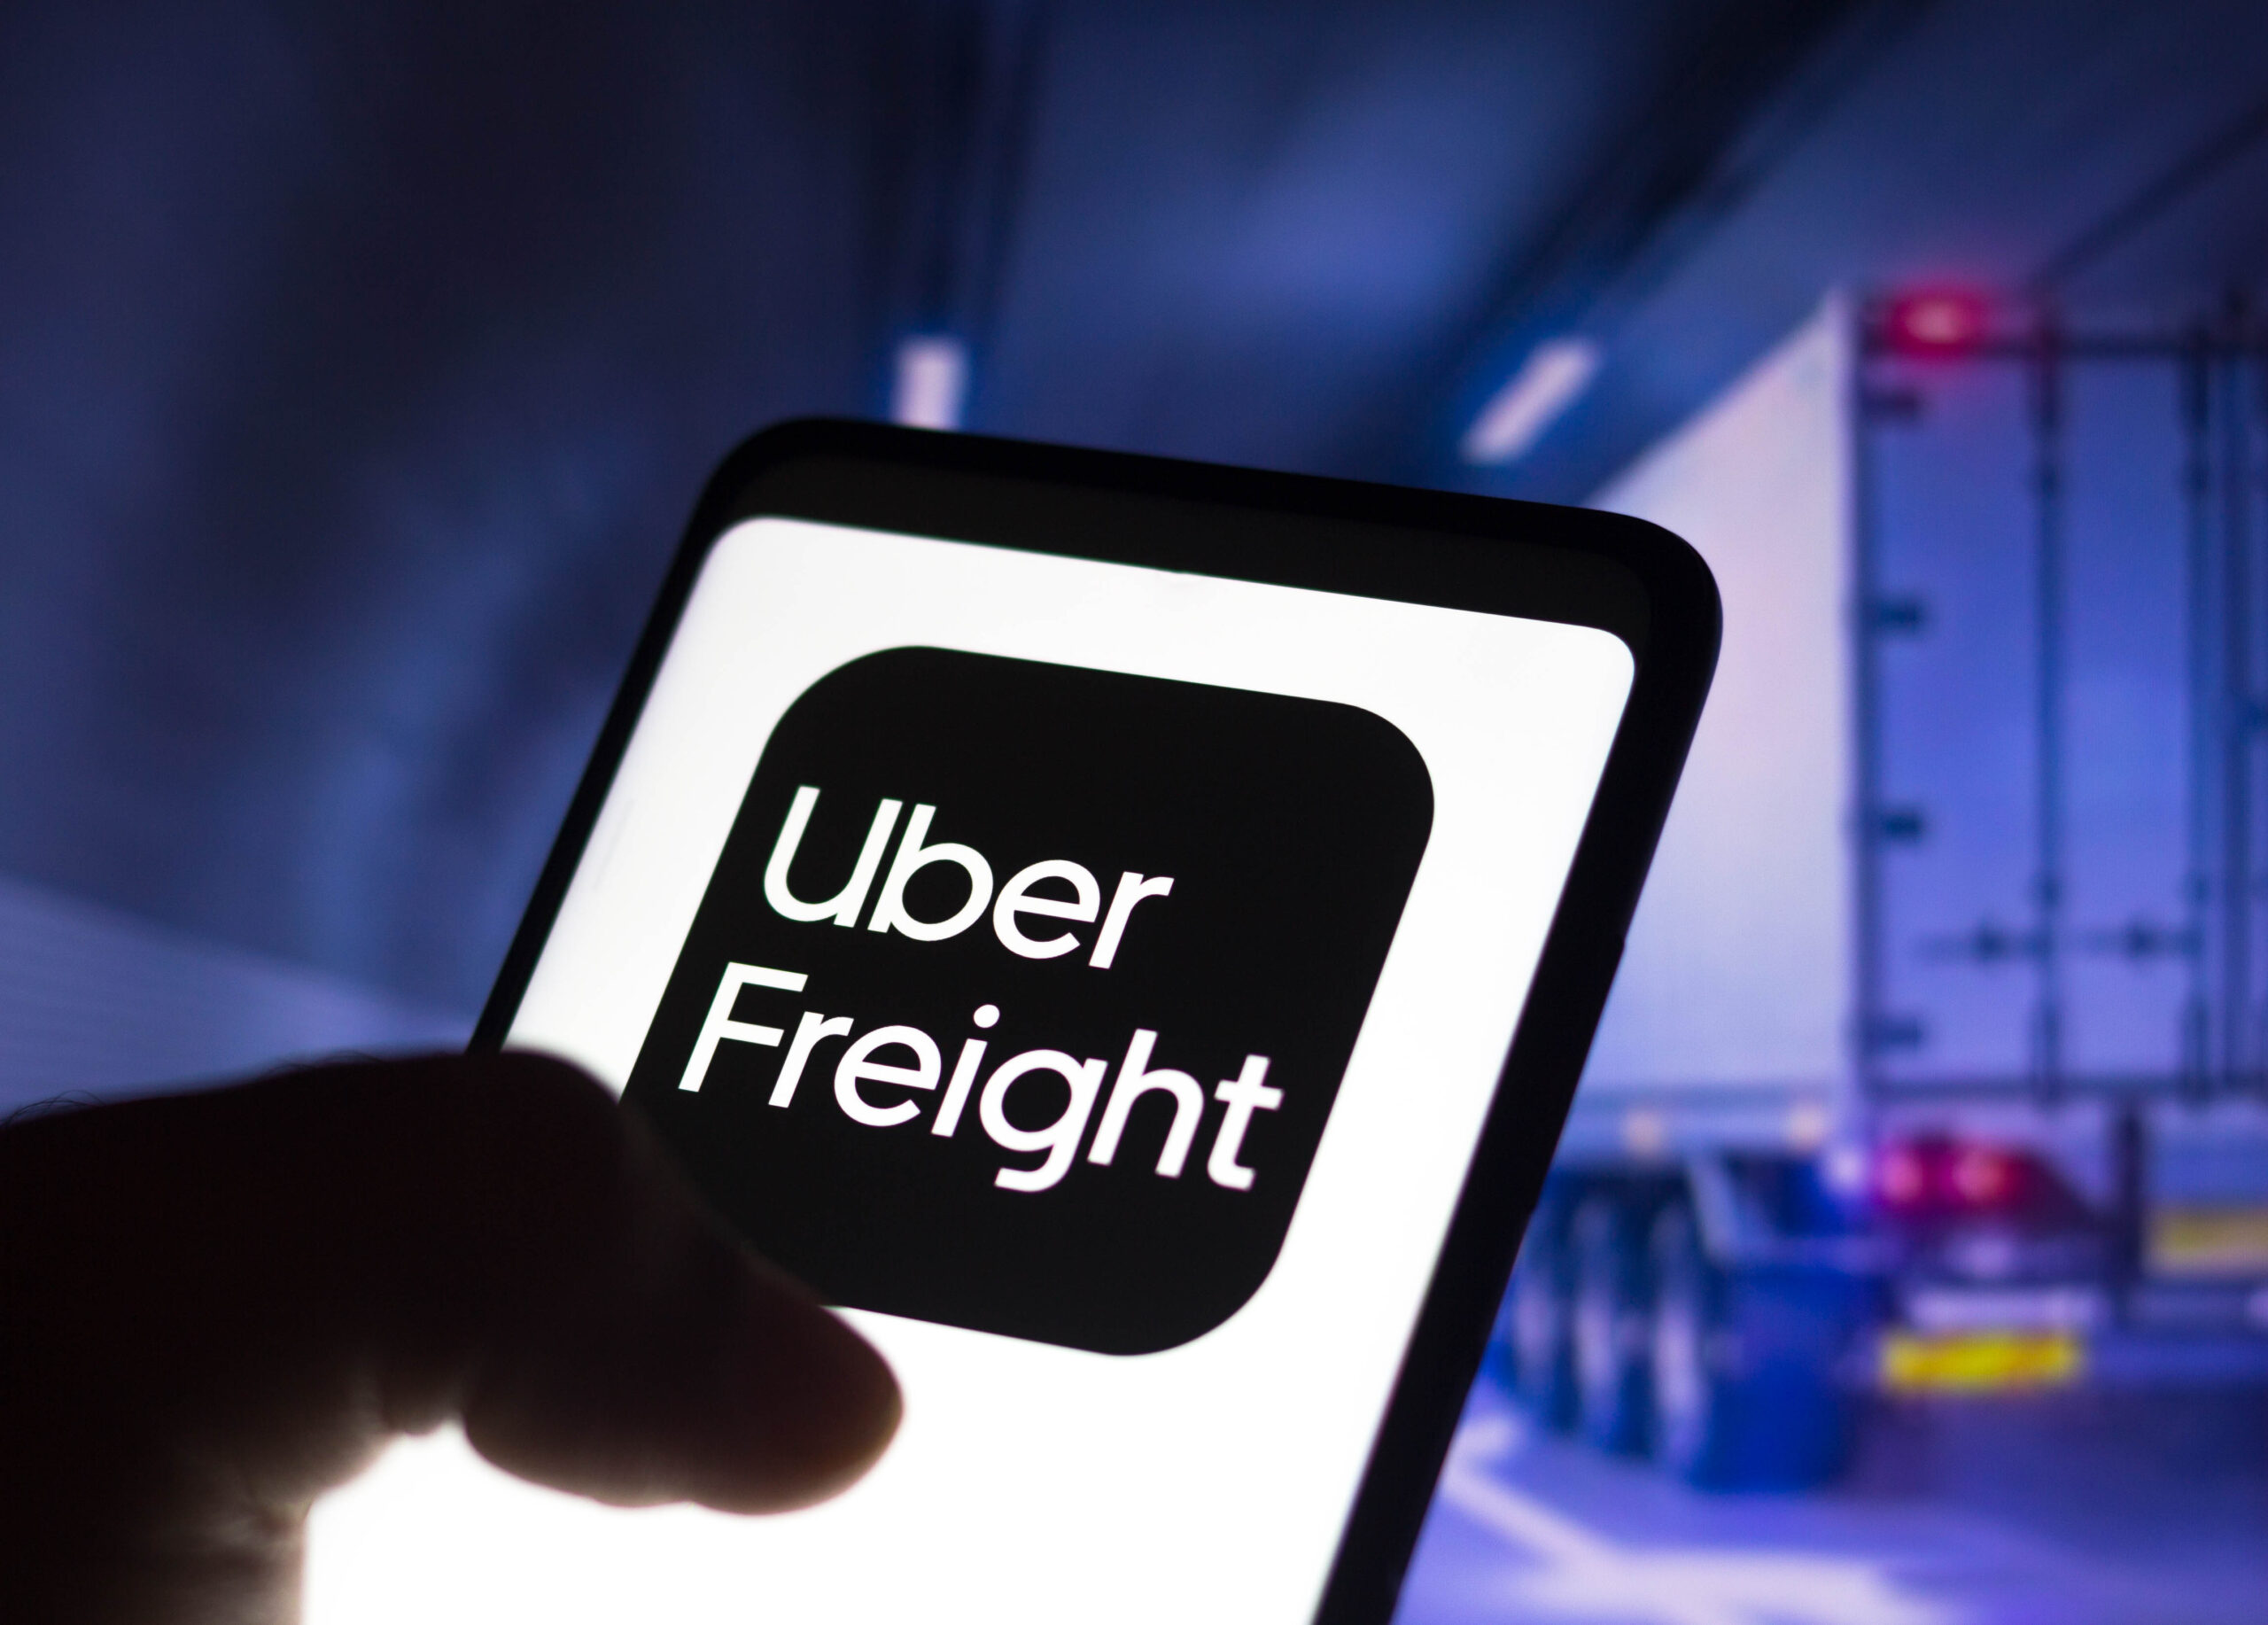 Uber-Freight-App-on-smartphone-with-delivery-truck-in-the-background